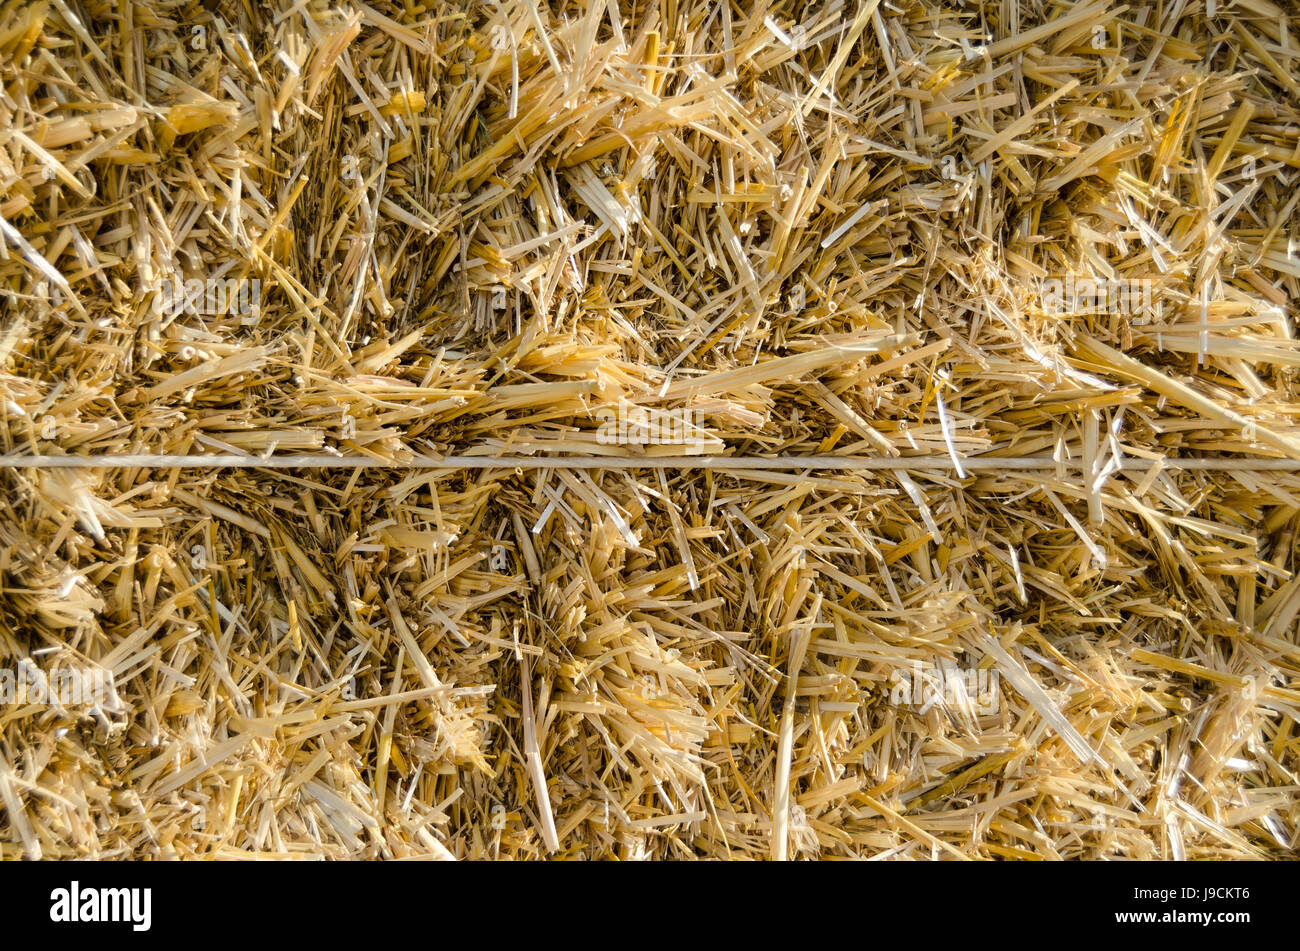 A close-up of a bale of hay Stock Photo